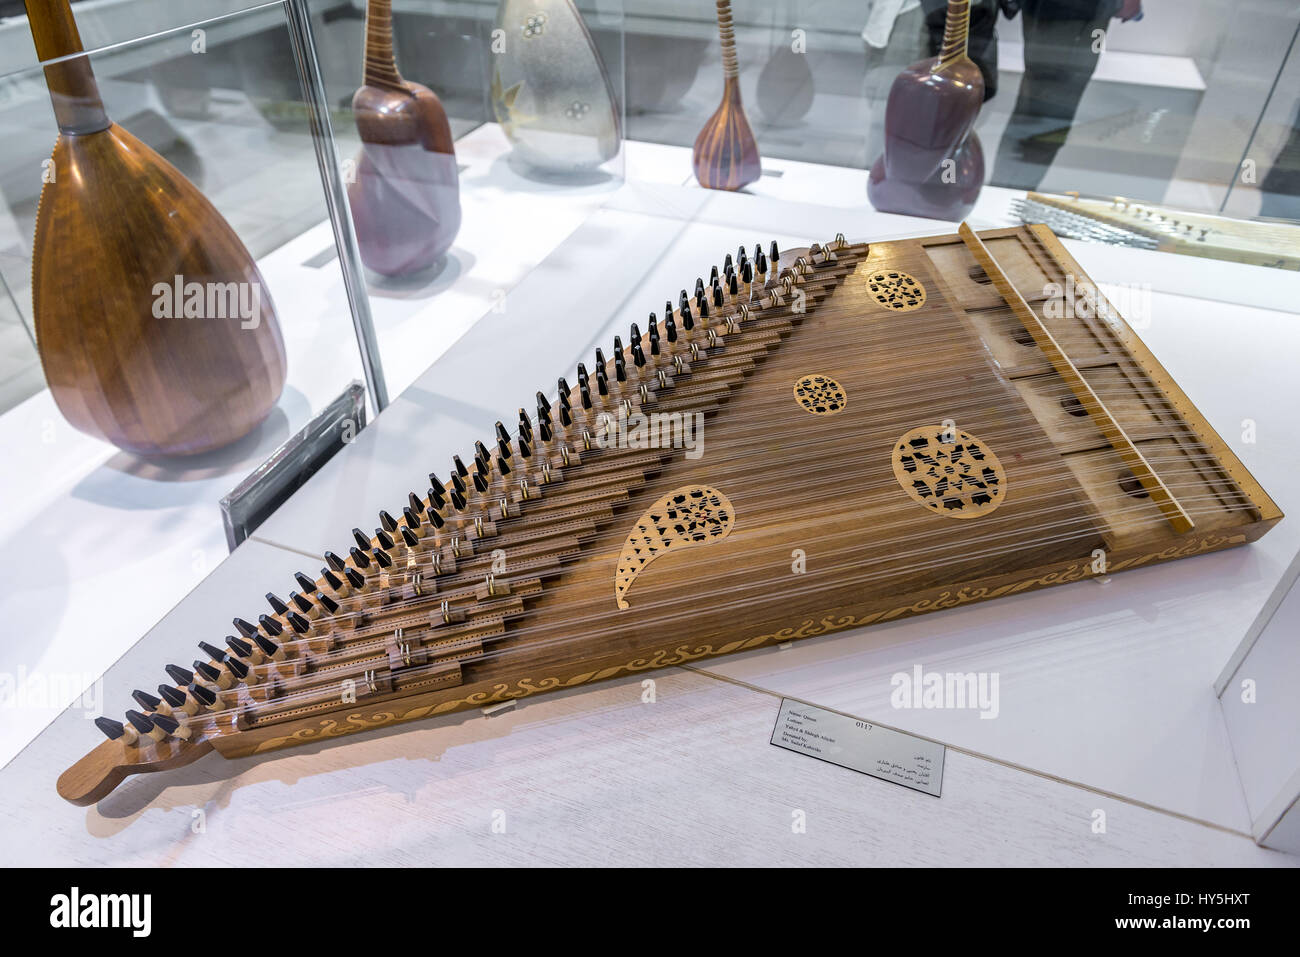 Traditional string instrument Qanun (also called kanun or ganoun) in Museum  of Music, homage to Iran's musical traditions in Isfahan, Iran Stock Photo  - Alamy